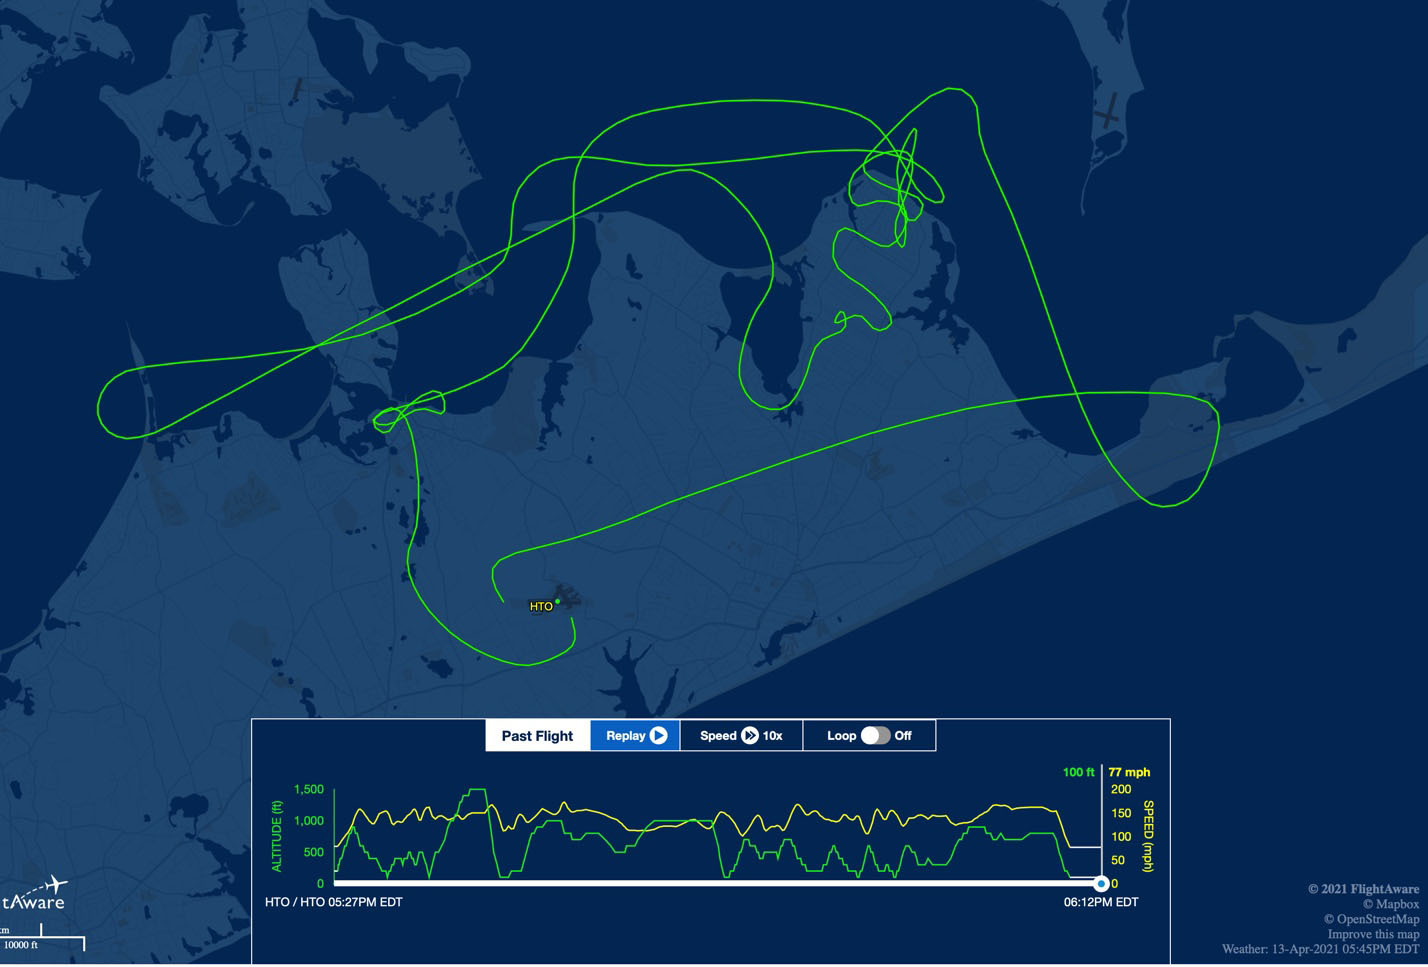 Flightaware.com’s record of the track, altitudes and speeds of David Wisner’s flight in his Cessna 182 over Sag Harbor and Springs on April 13 with altitudes as low as 100 feet.